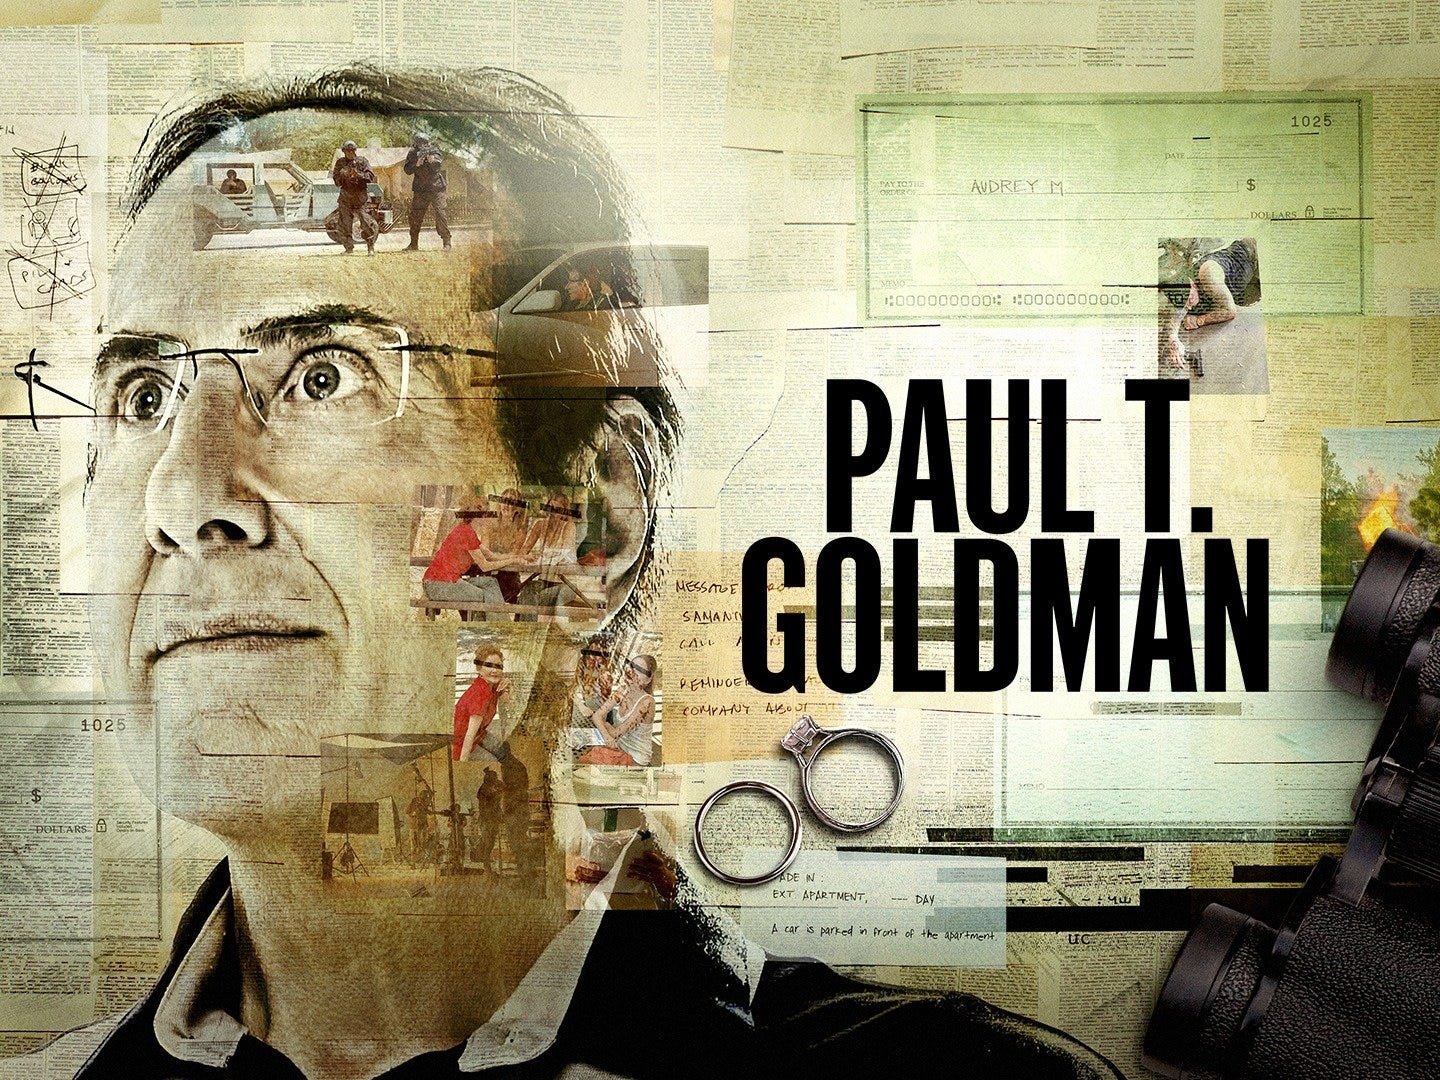 The Paul T Goldman poster showing his face 